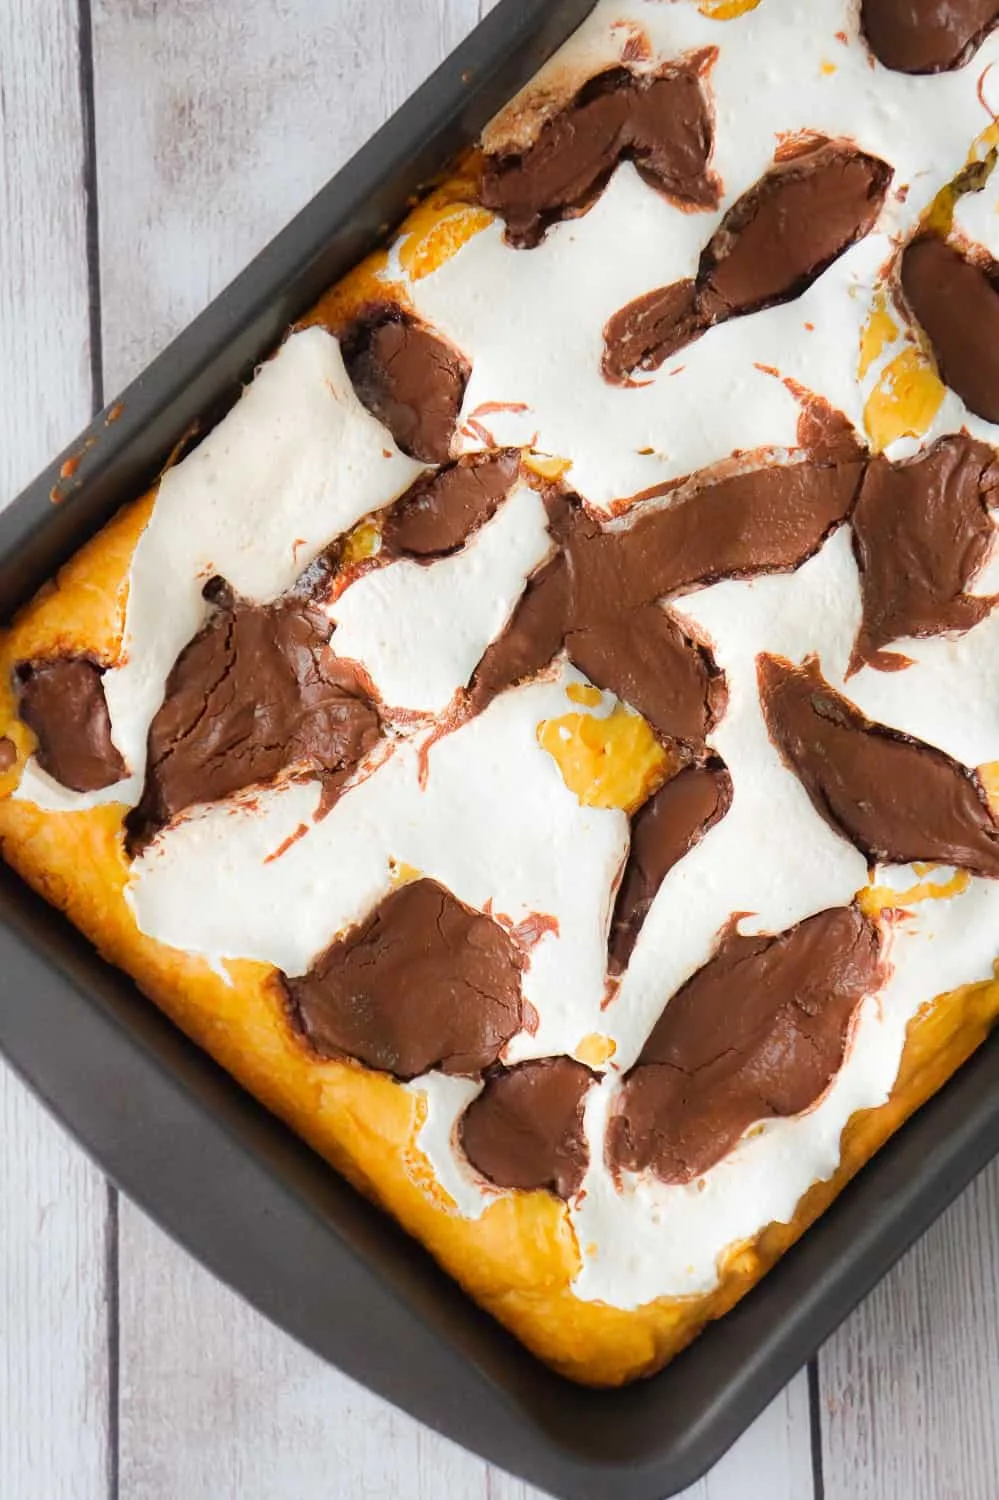 Nutella S'mores Cookie Cake is an easy dessert recipe using boxed cake mix. This delicious chocolate chip cookie cake is loaded with Nutella and Marshmallow Fluff.